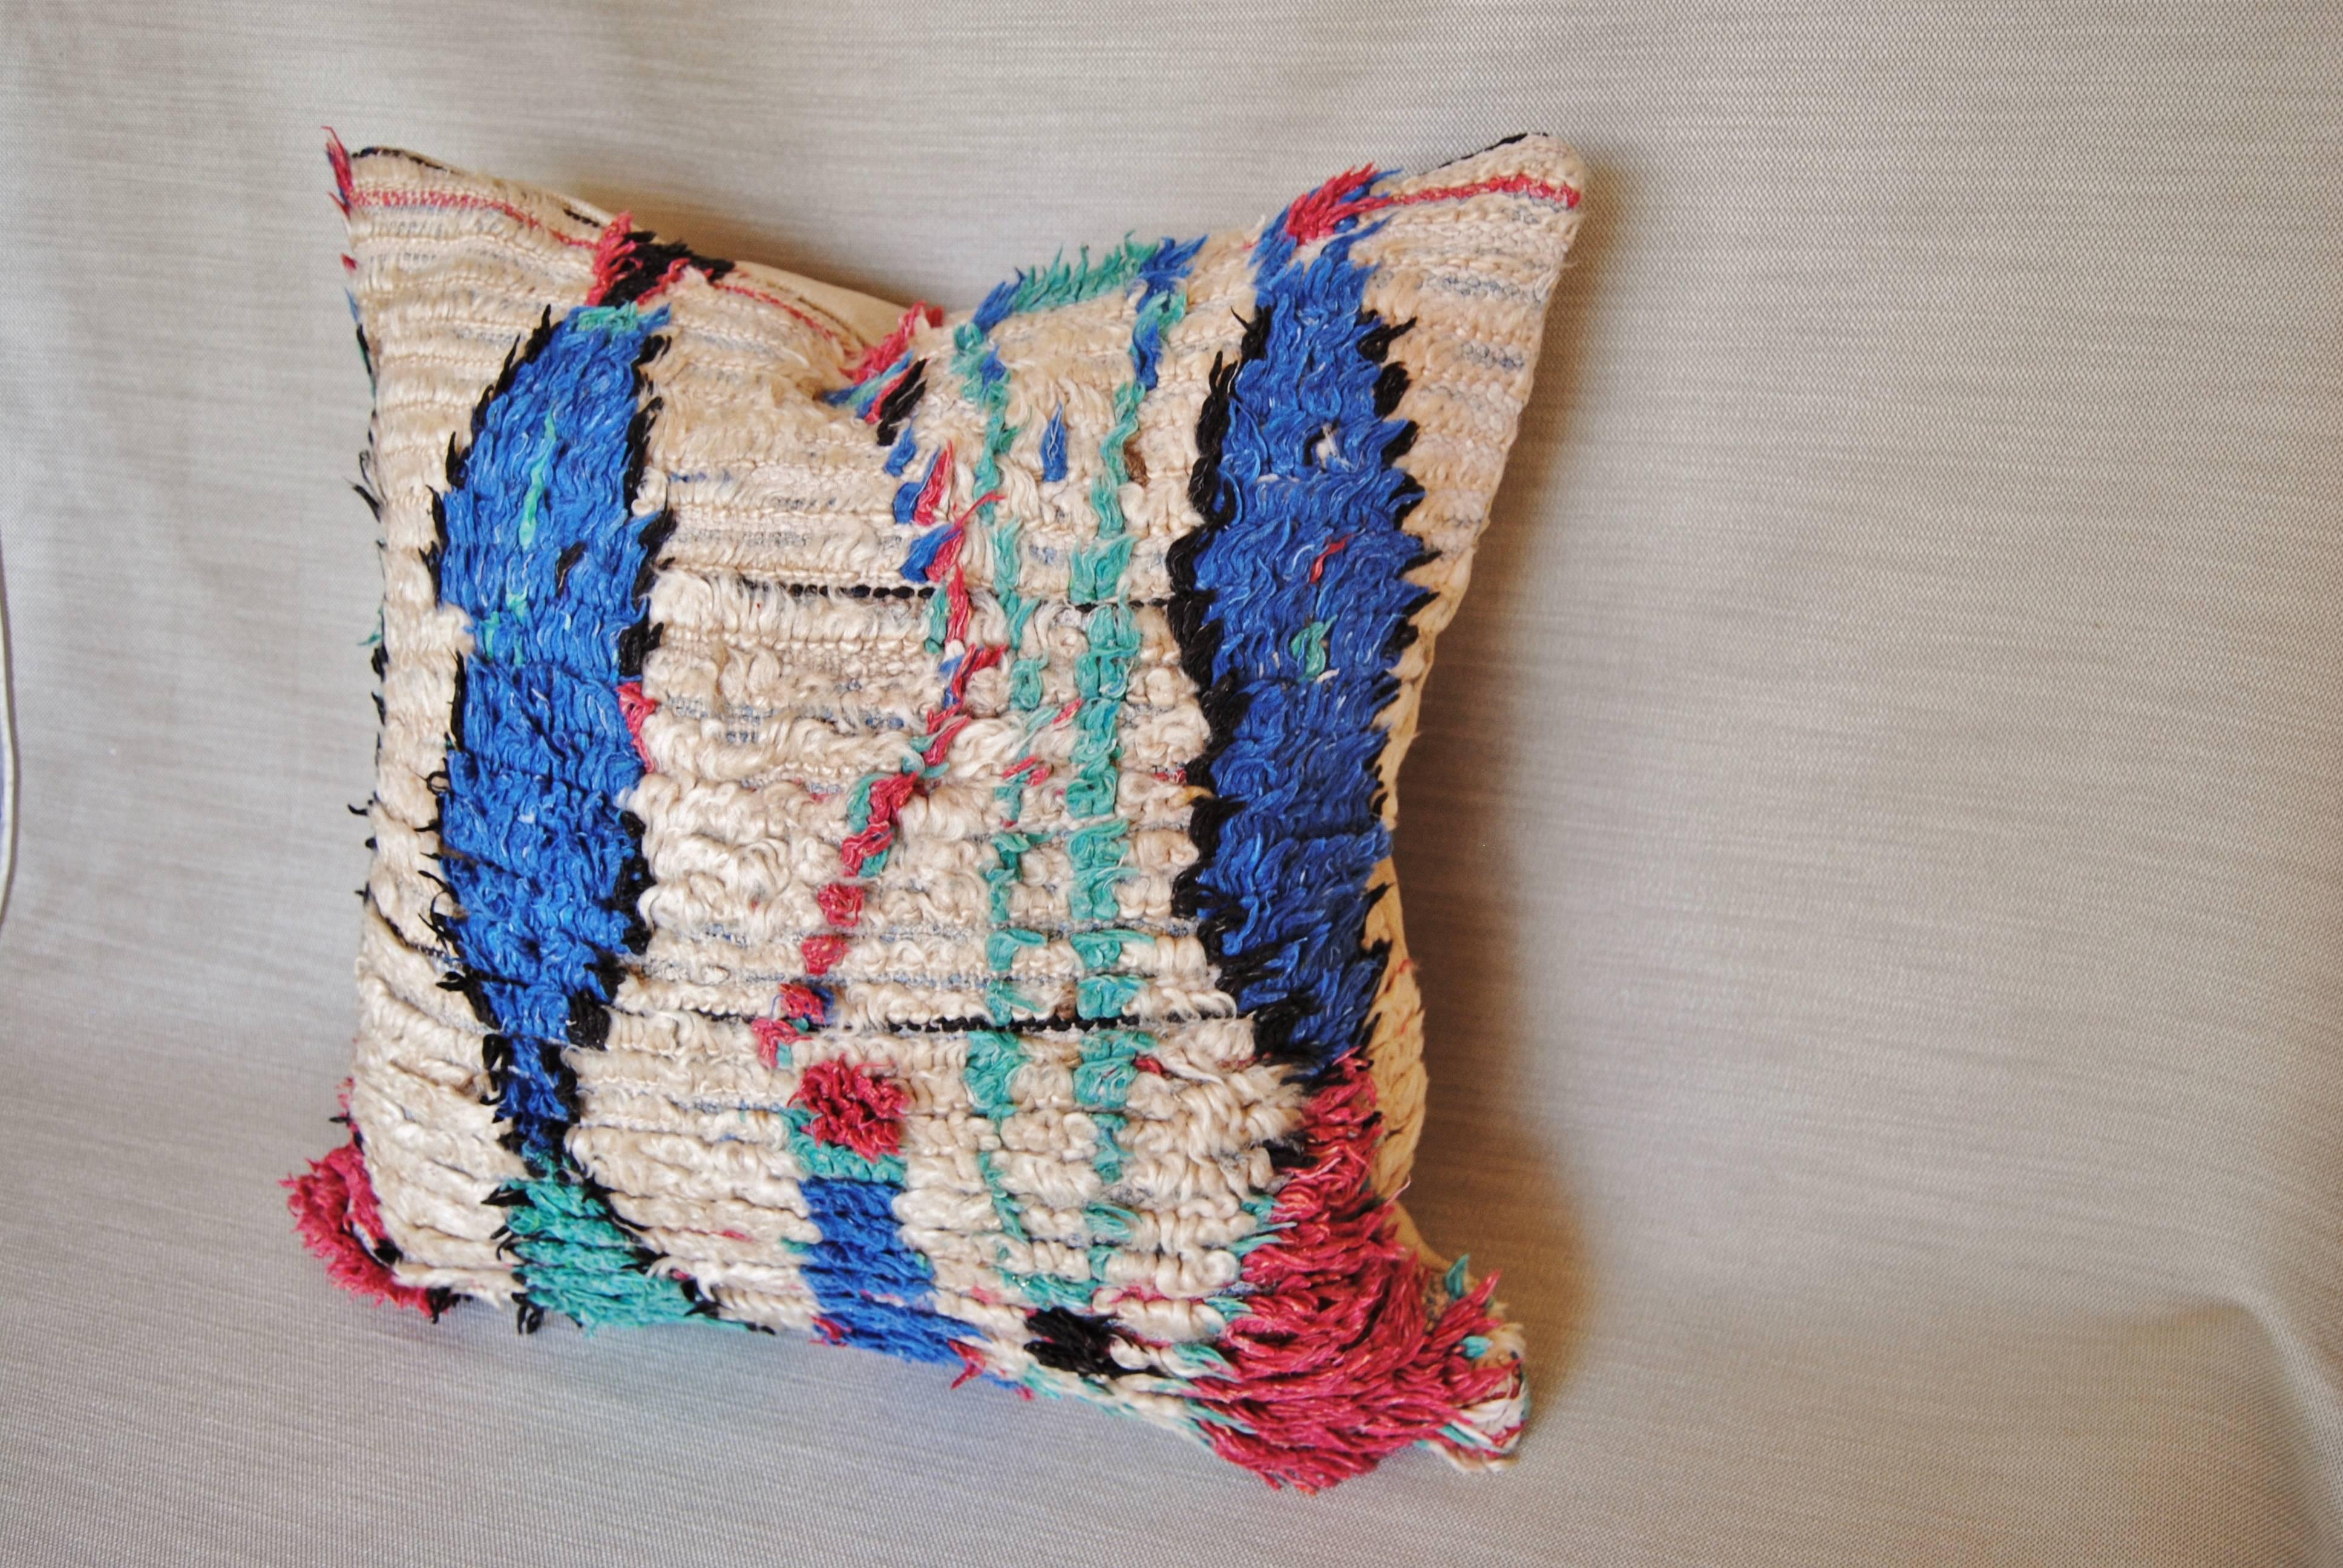 Custom pillow cut from a vintage hand loomed wool Moroccan Azilal rug from the Atlas Mountains. Textile has a soft hand and vividly colored tribal designs. Pillow is backed in a cream linen blend, filled with an insert of 50-50 down and feathers and